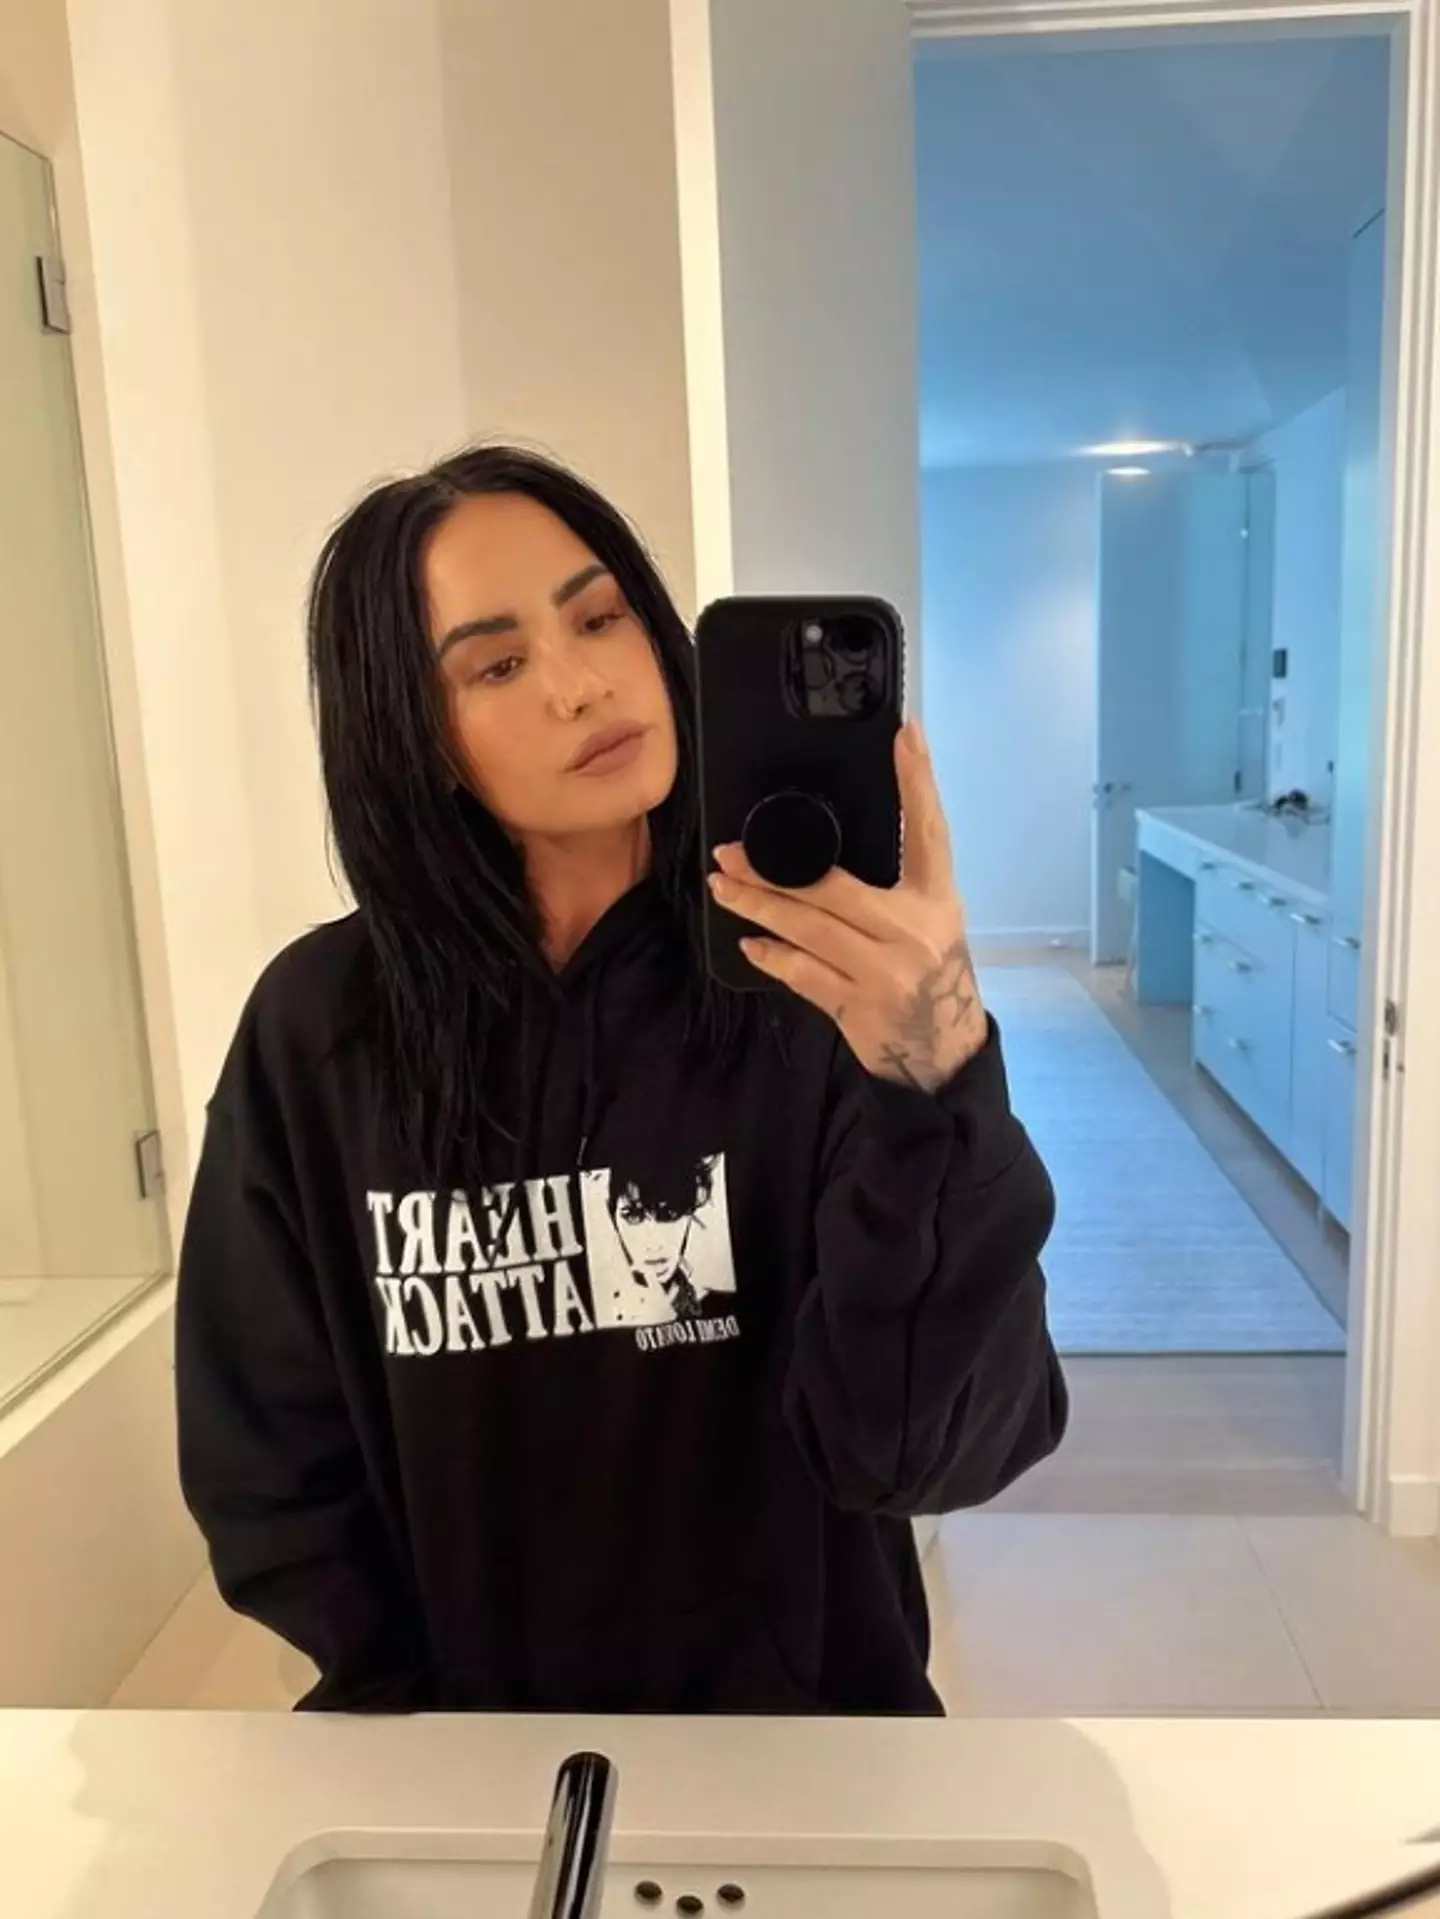 Demi Lovato has spoken about how she views gender many times.